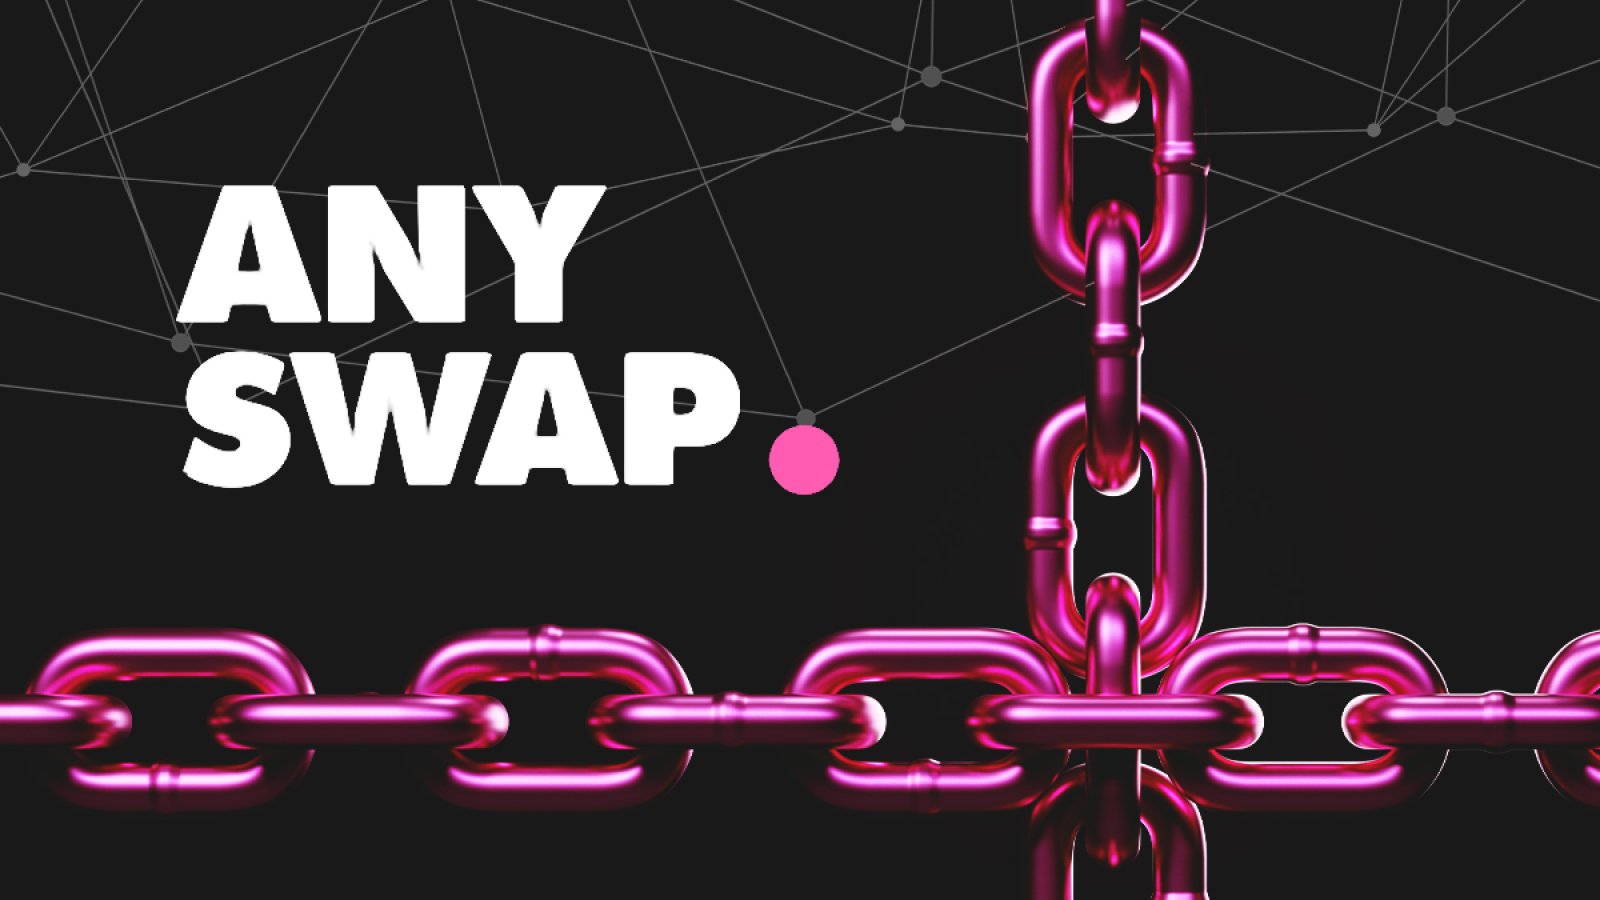 A Comprehensive Review Of The Cross-Chain DEX Anyswap